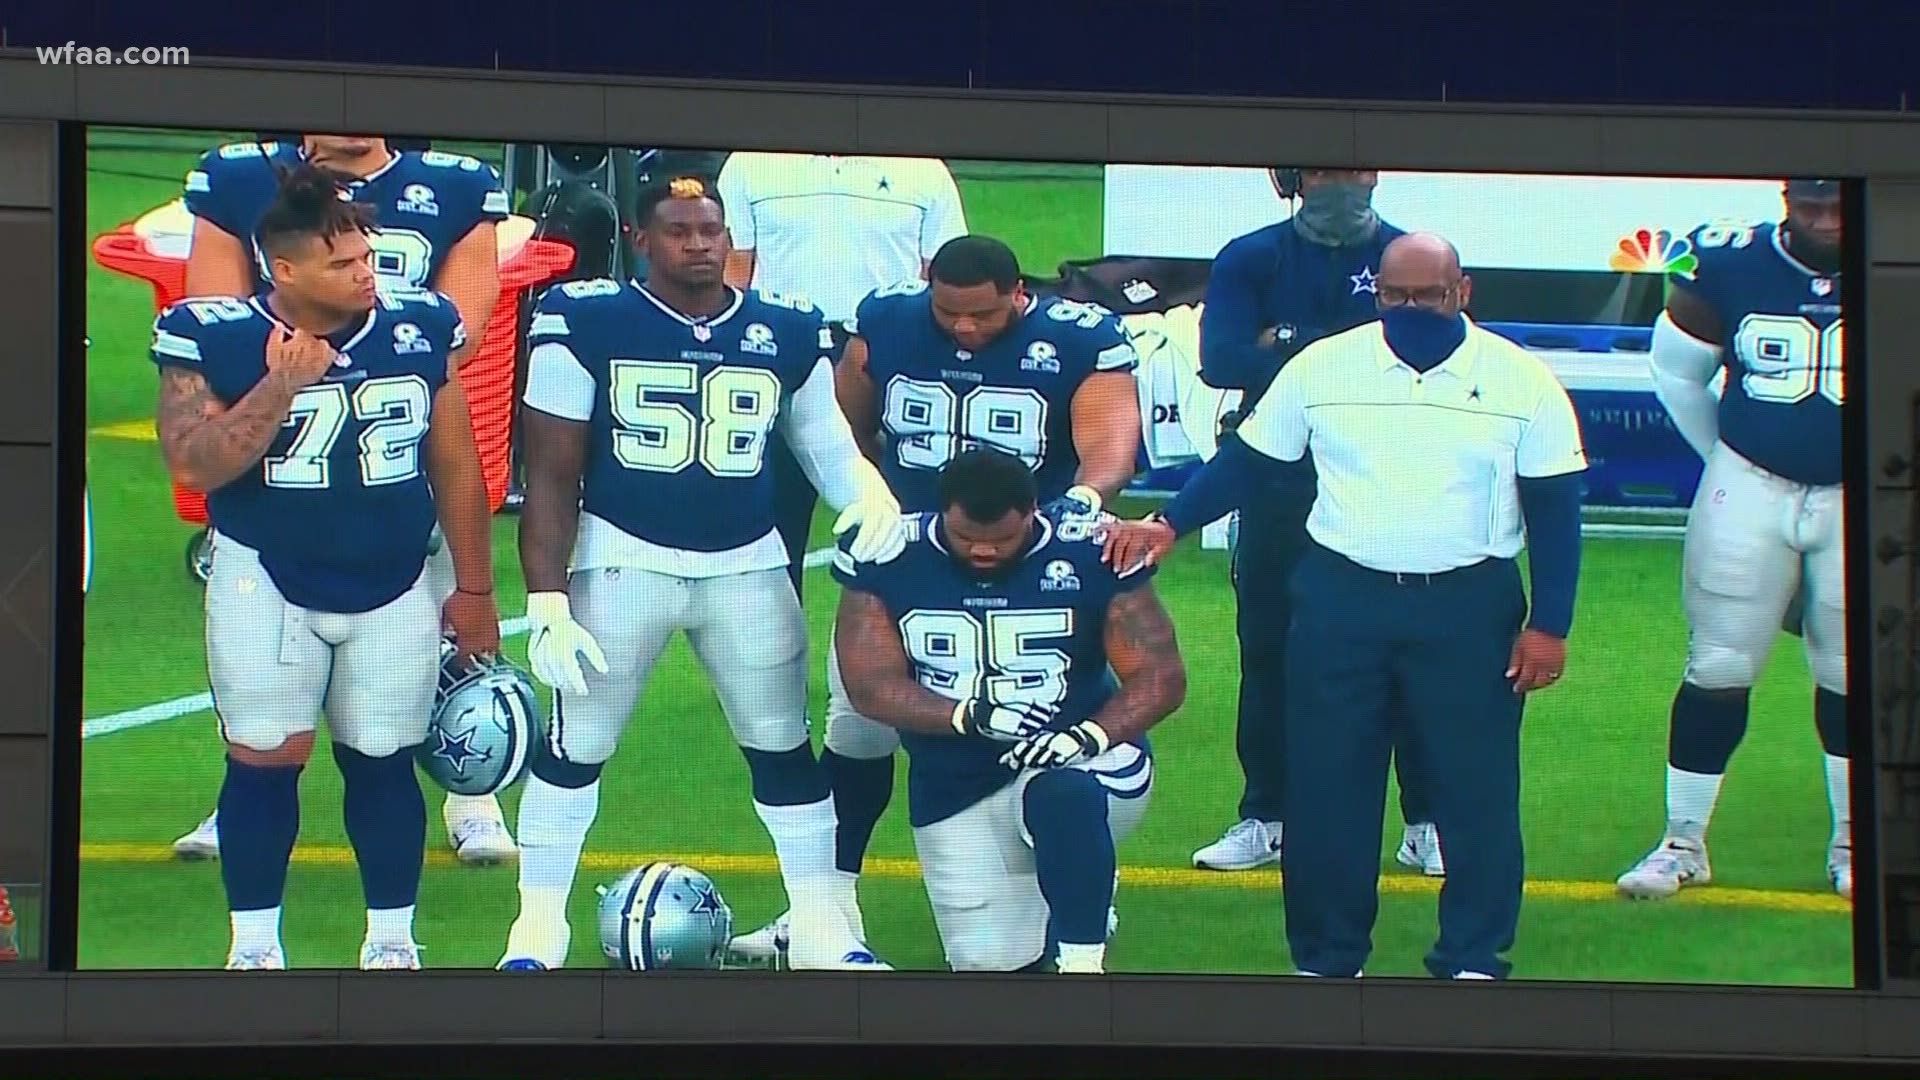 Before the Cowboys season opener against the Rams, defensive lineman Dontari Poe kneeled during the anthem.